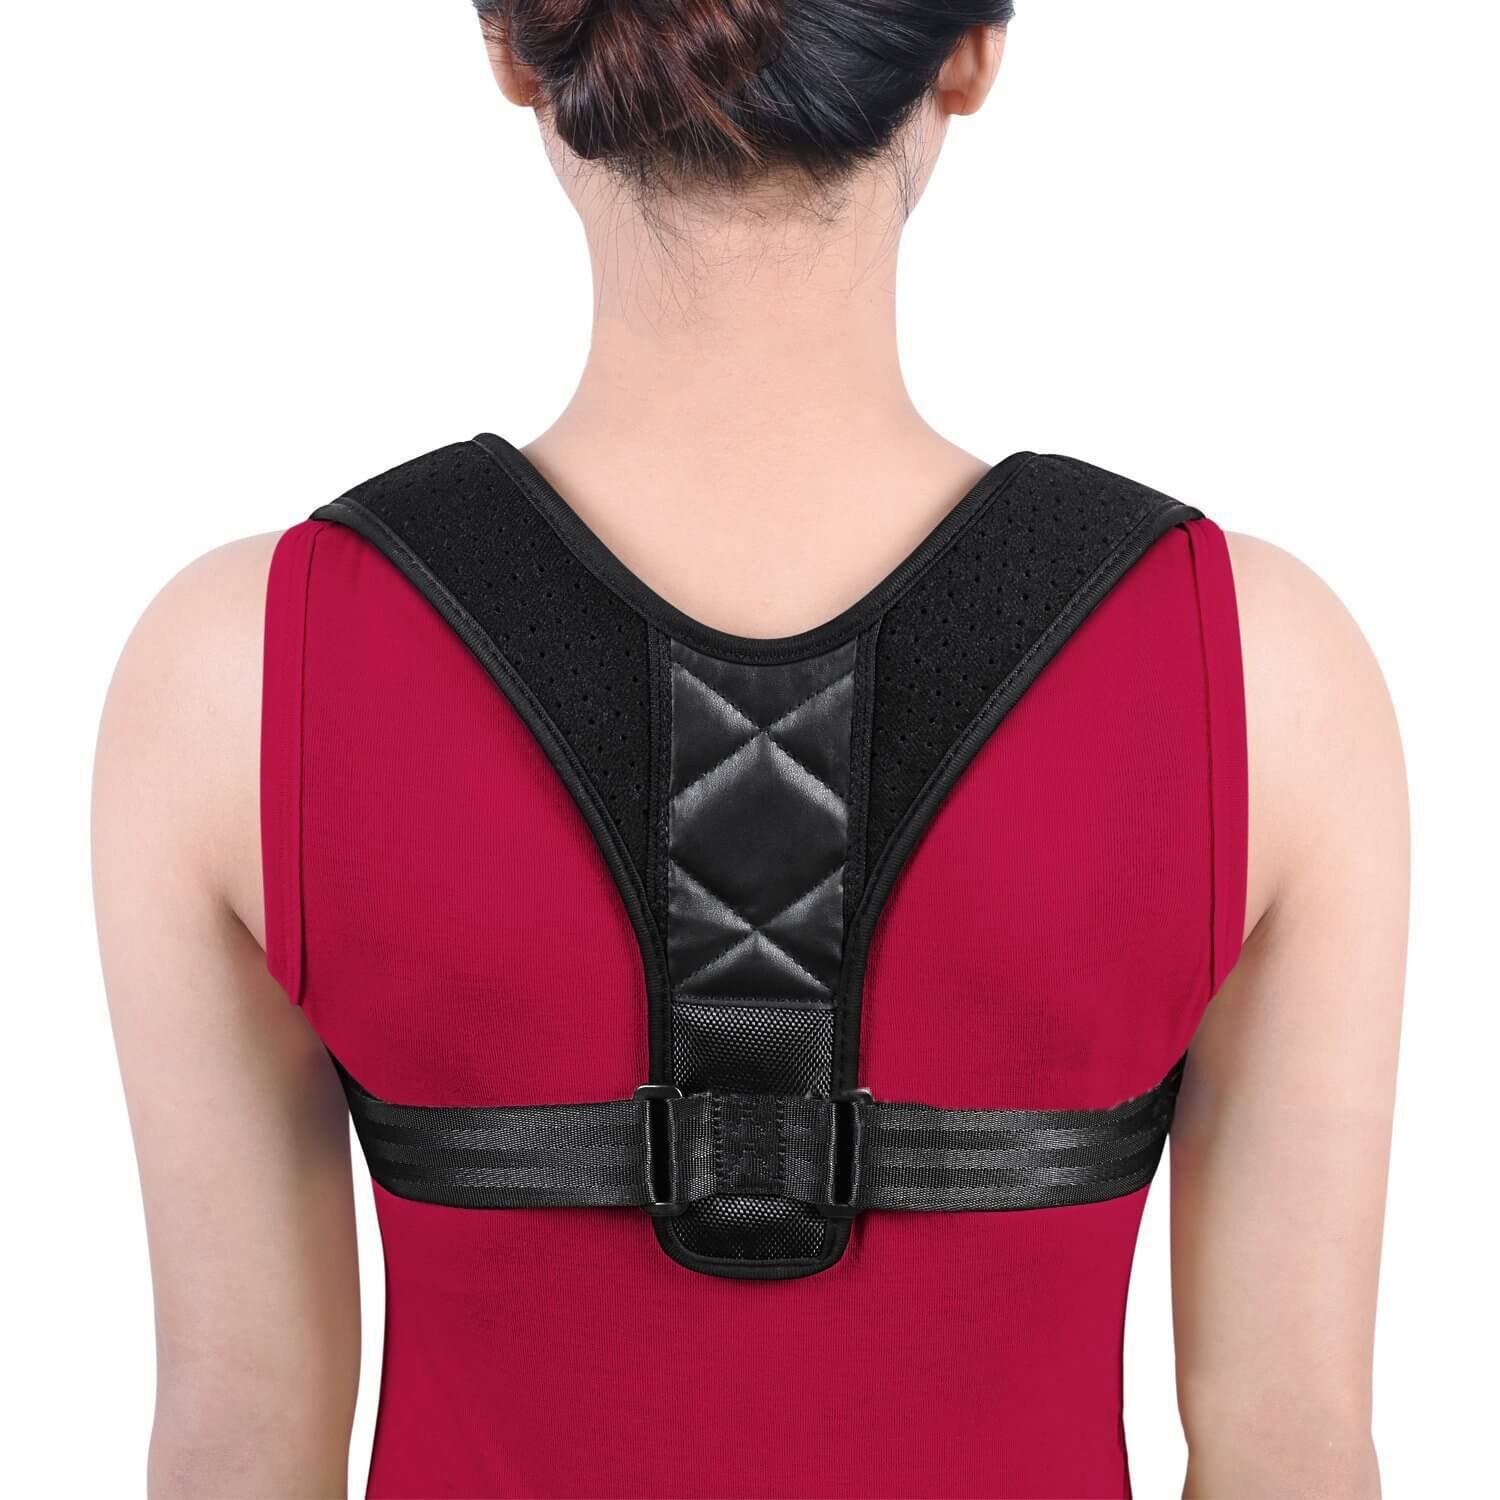 Stand Tall And Confidently With Back Posture Corrector